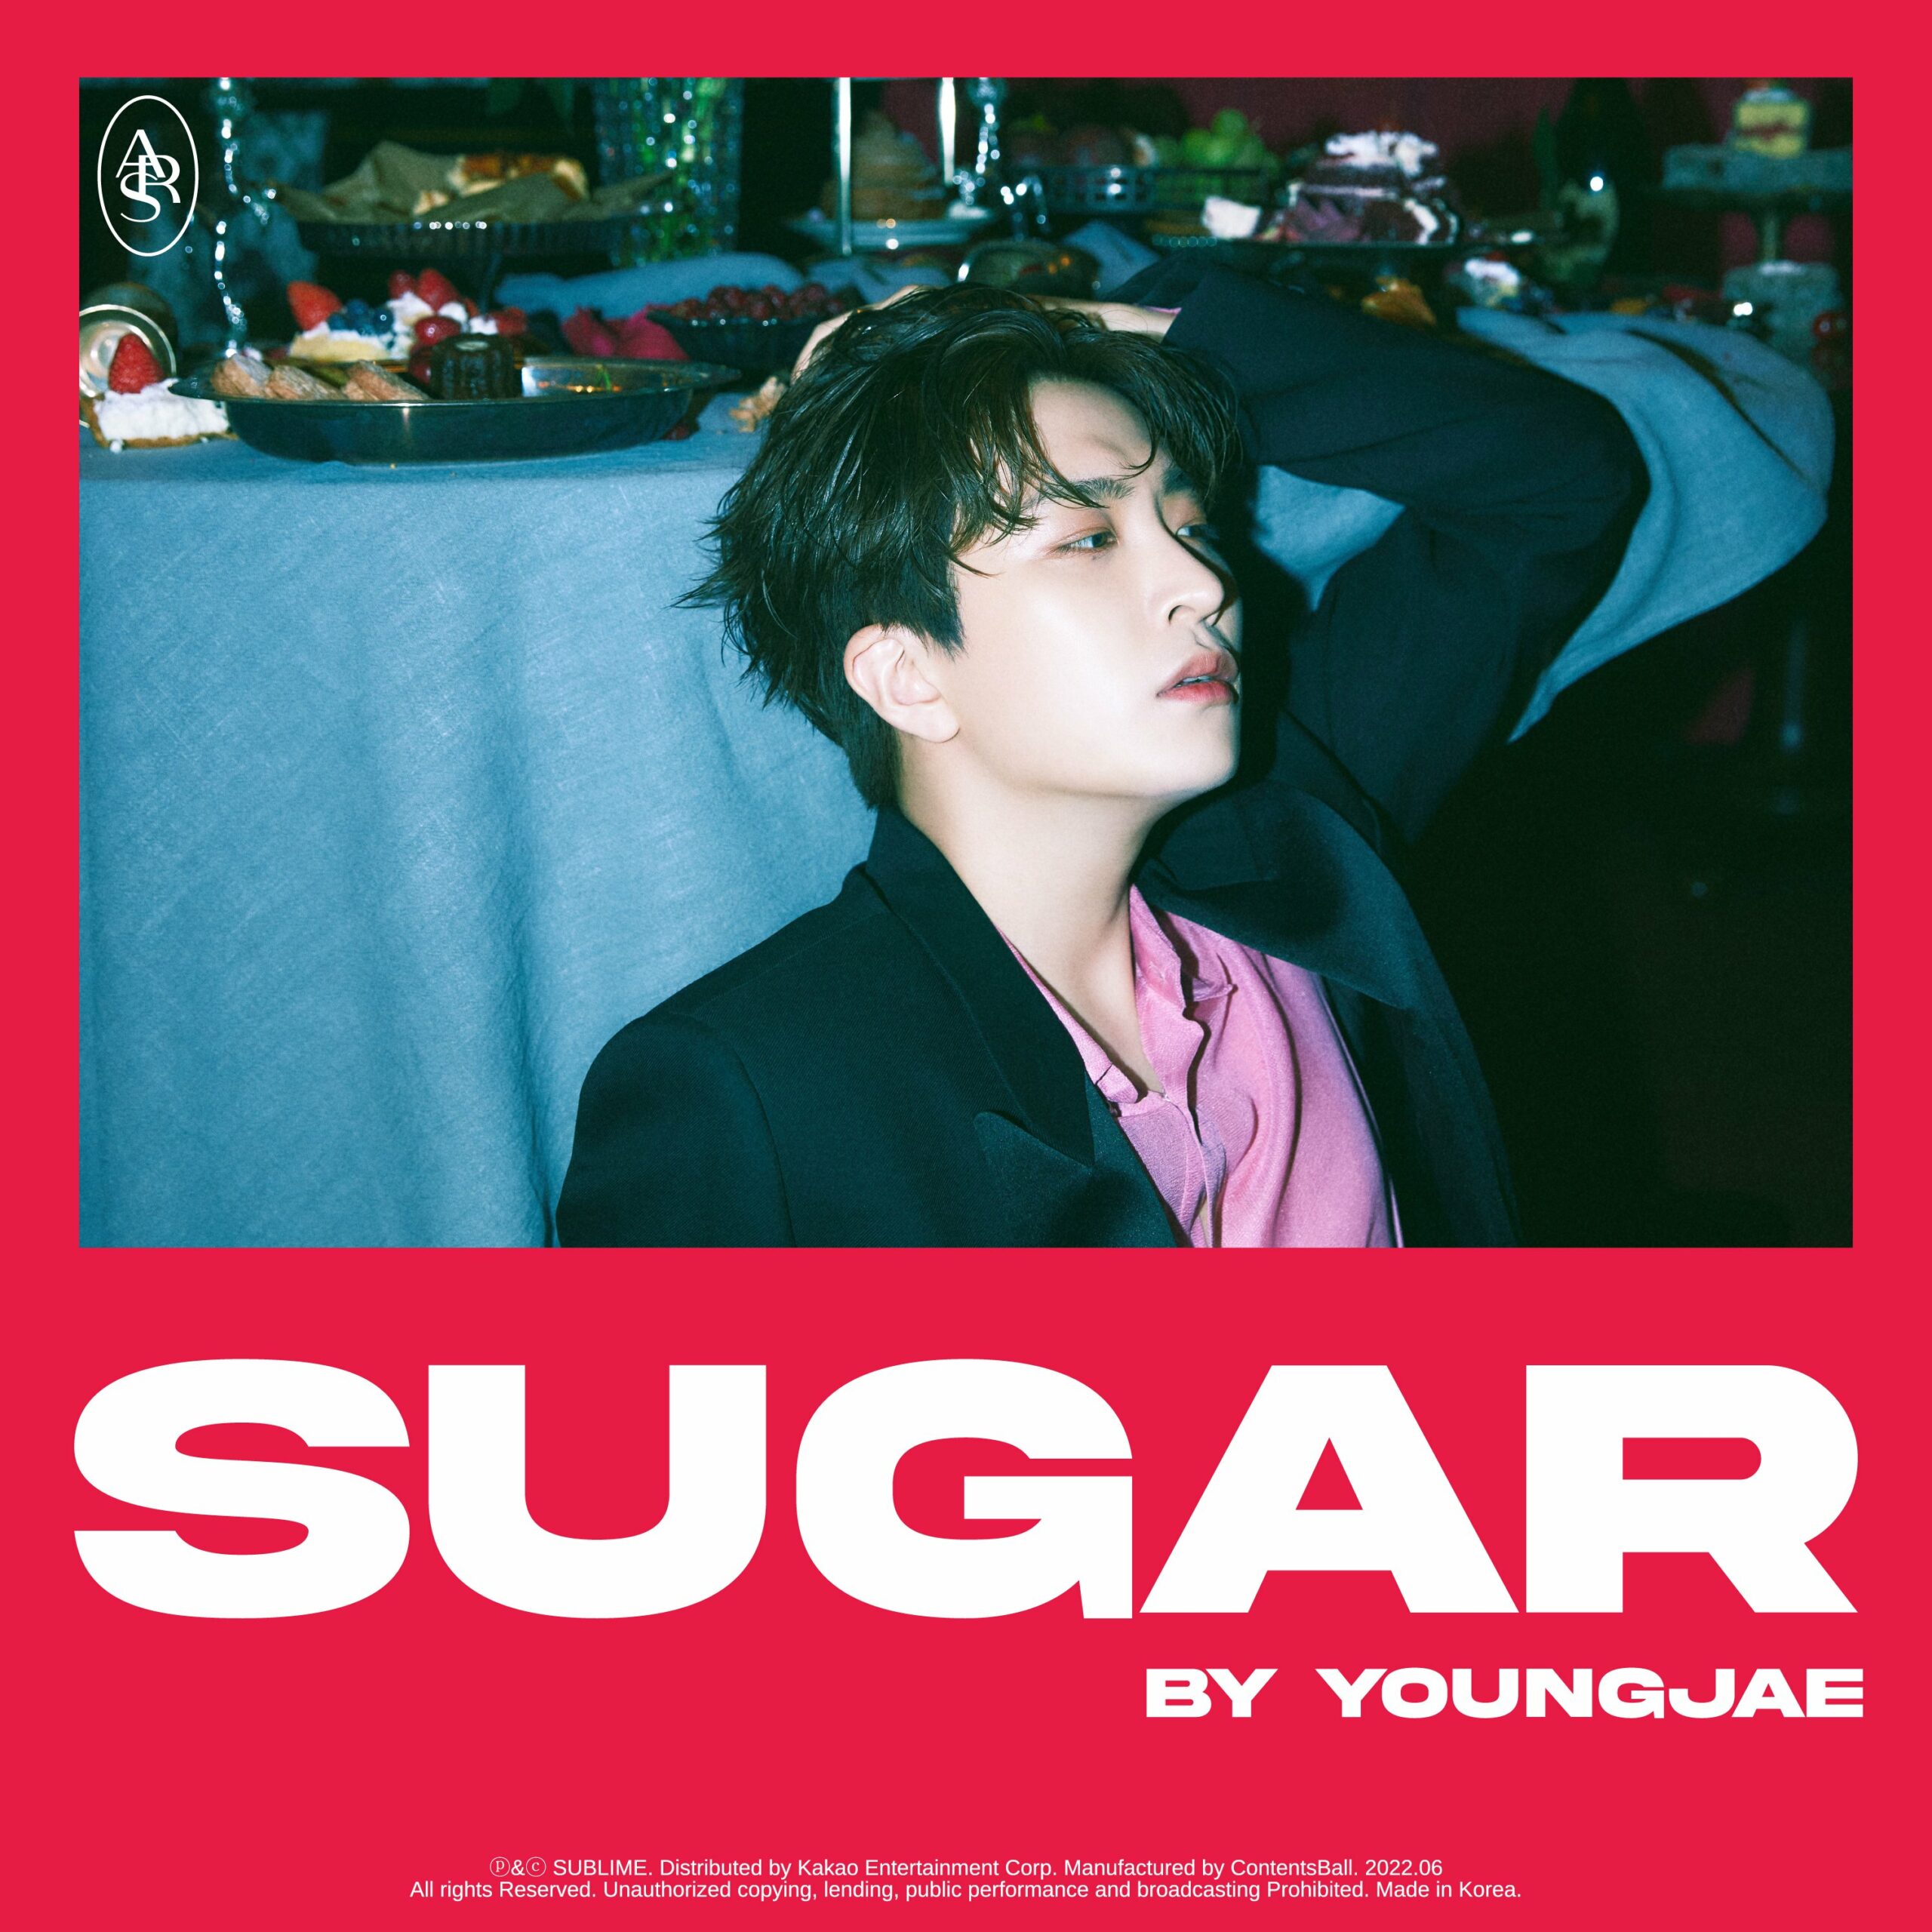  Youngjae releases music video titled 'Sugar'